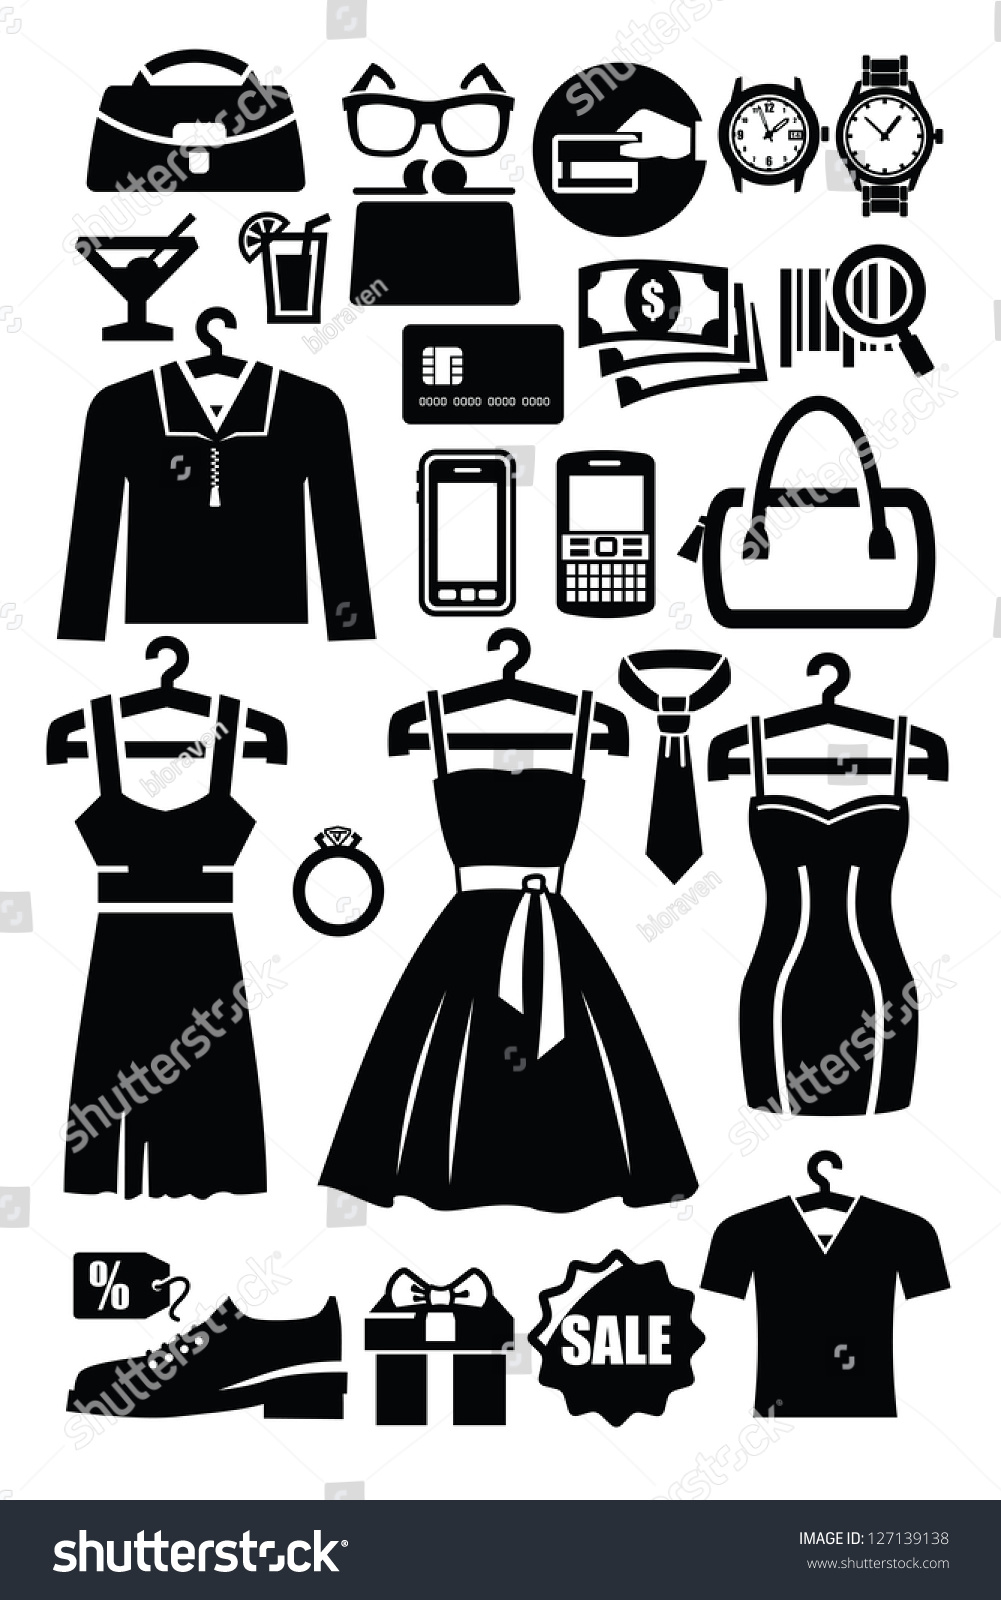 Vector Black Clothing Shop Icon Set On White - 127139138 : Shutterstock